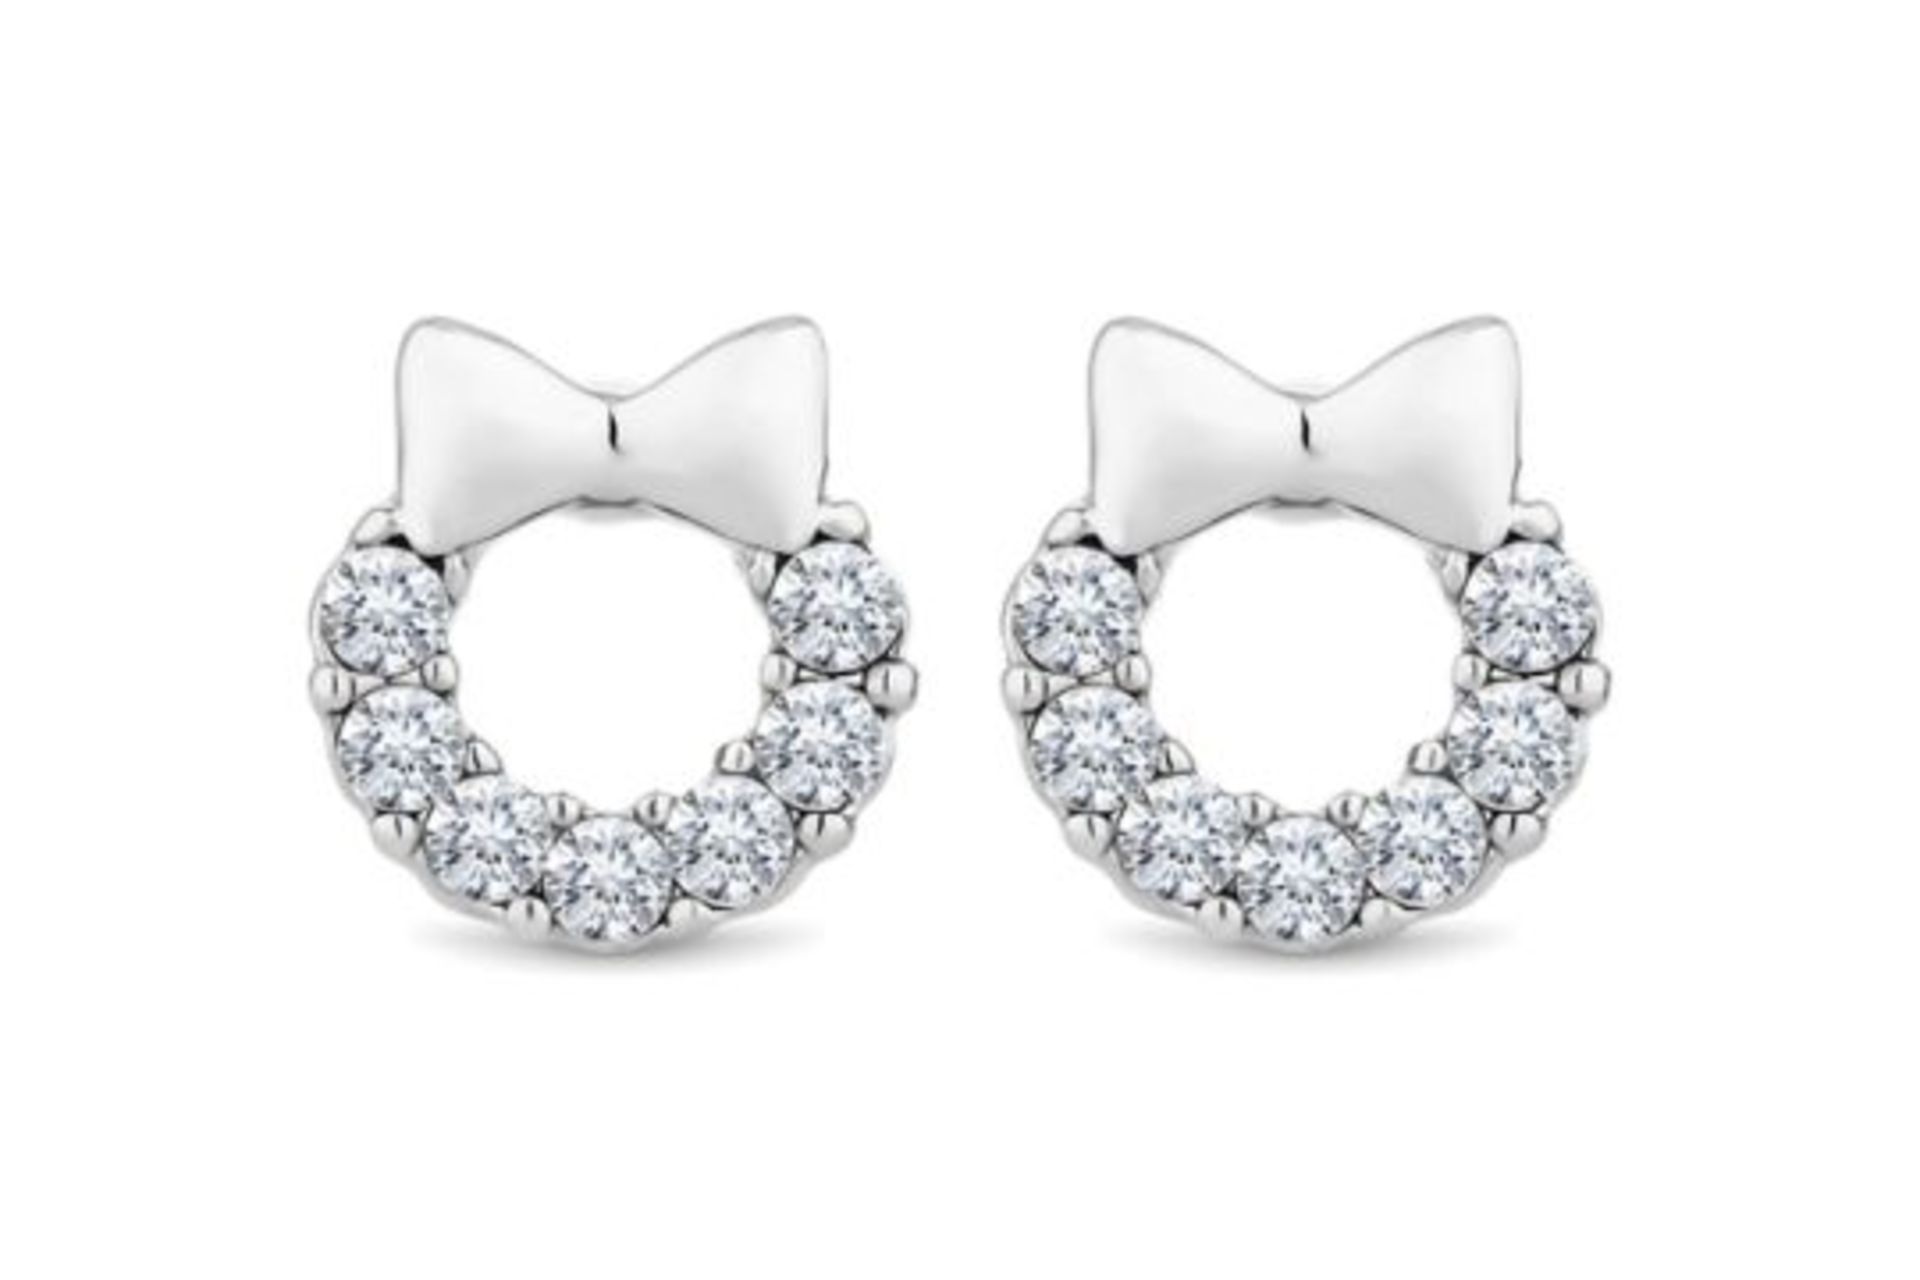 9 X BRAND NEW DIAMONDSTYLE LONDON WREATH STUD EARRINGS WITH CERTIFICATION OF AUTHENTICITY RRP £45 - Image 2 of 2